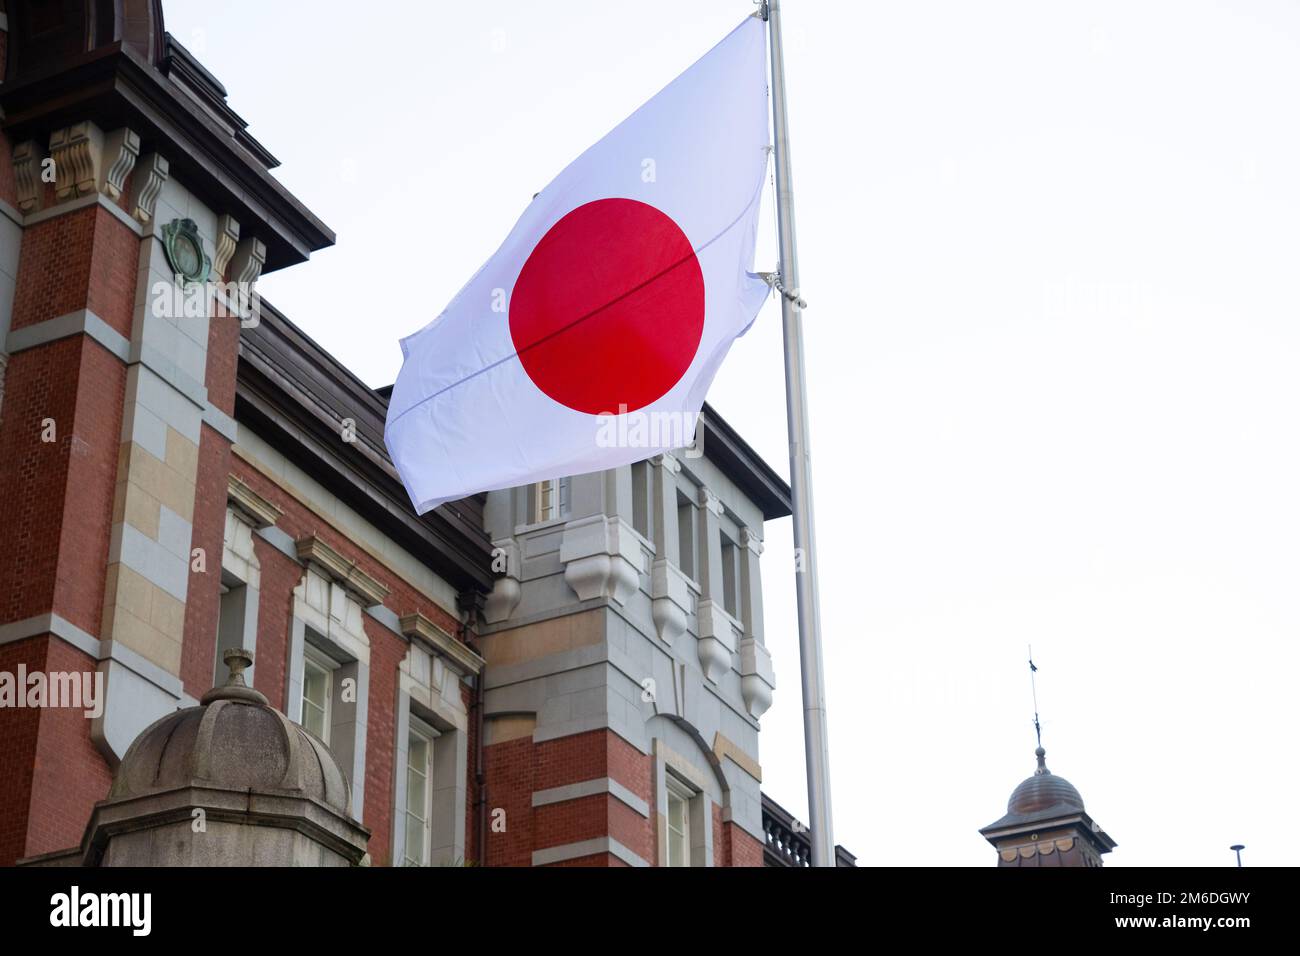 Tokyo, Japan. 3rd Jan, 2023. Japanese flags (Hinomaru) fly outside Tokyo Station (æ±äº¬é§…), the central intercity station on the Japanese Shinkansen bullet train high speed rail network for JR East and JR Central, in the Marunouchi business district near the Imperial Palace grounds with tourists, commuters, business travelers and holiday travelers alike passing through.Japanese Yen (JPY) steward, Bank of Japan Governor Haruhiko Kuroda doubled the interest cap on 10-year bonds on a stimulus program to increase the value of the Japanese Yen on foreign currency exchanges. Finance, economy, Stock Photo